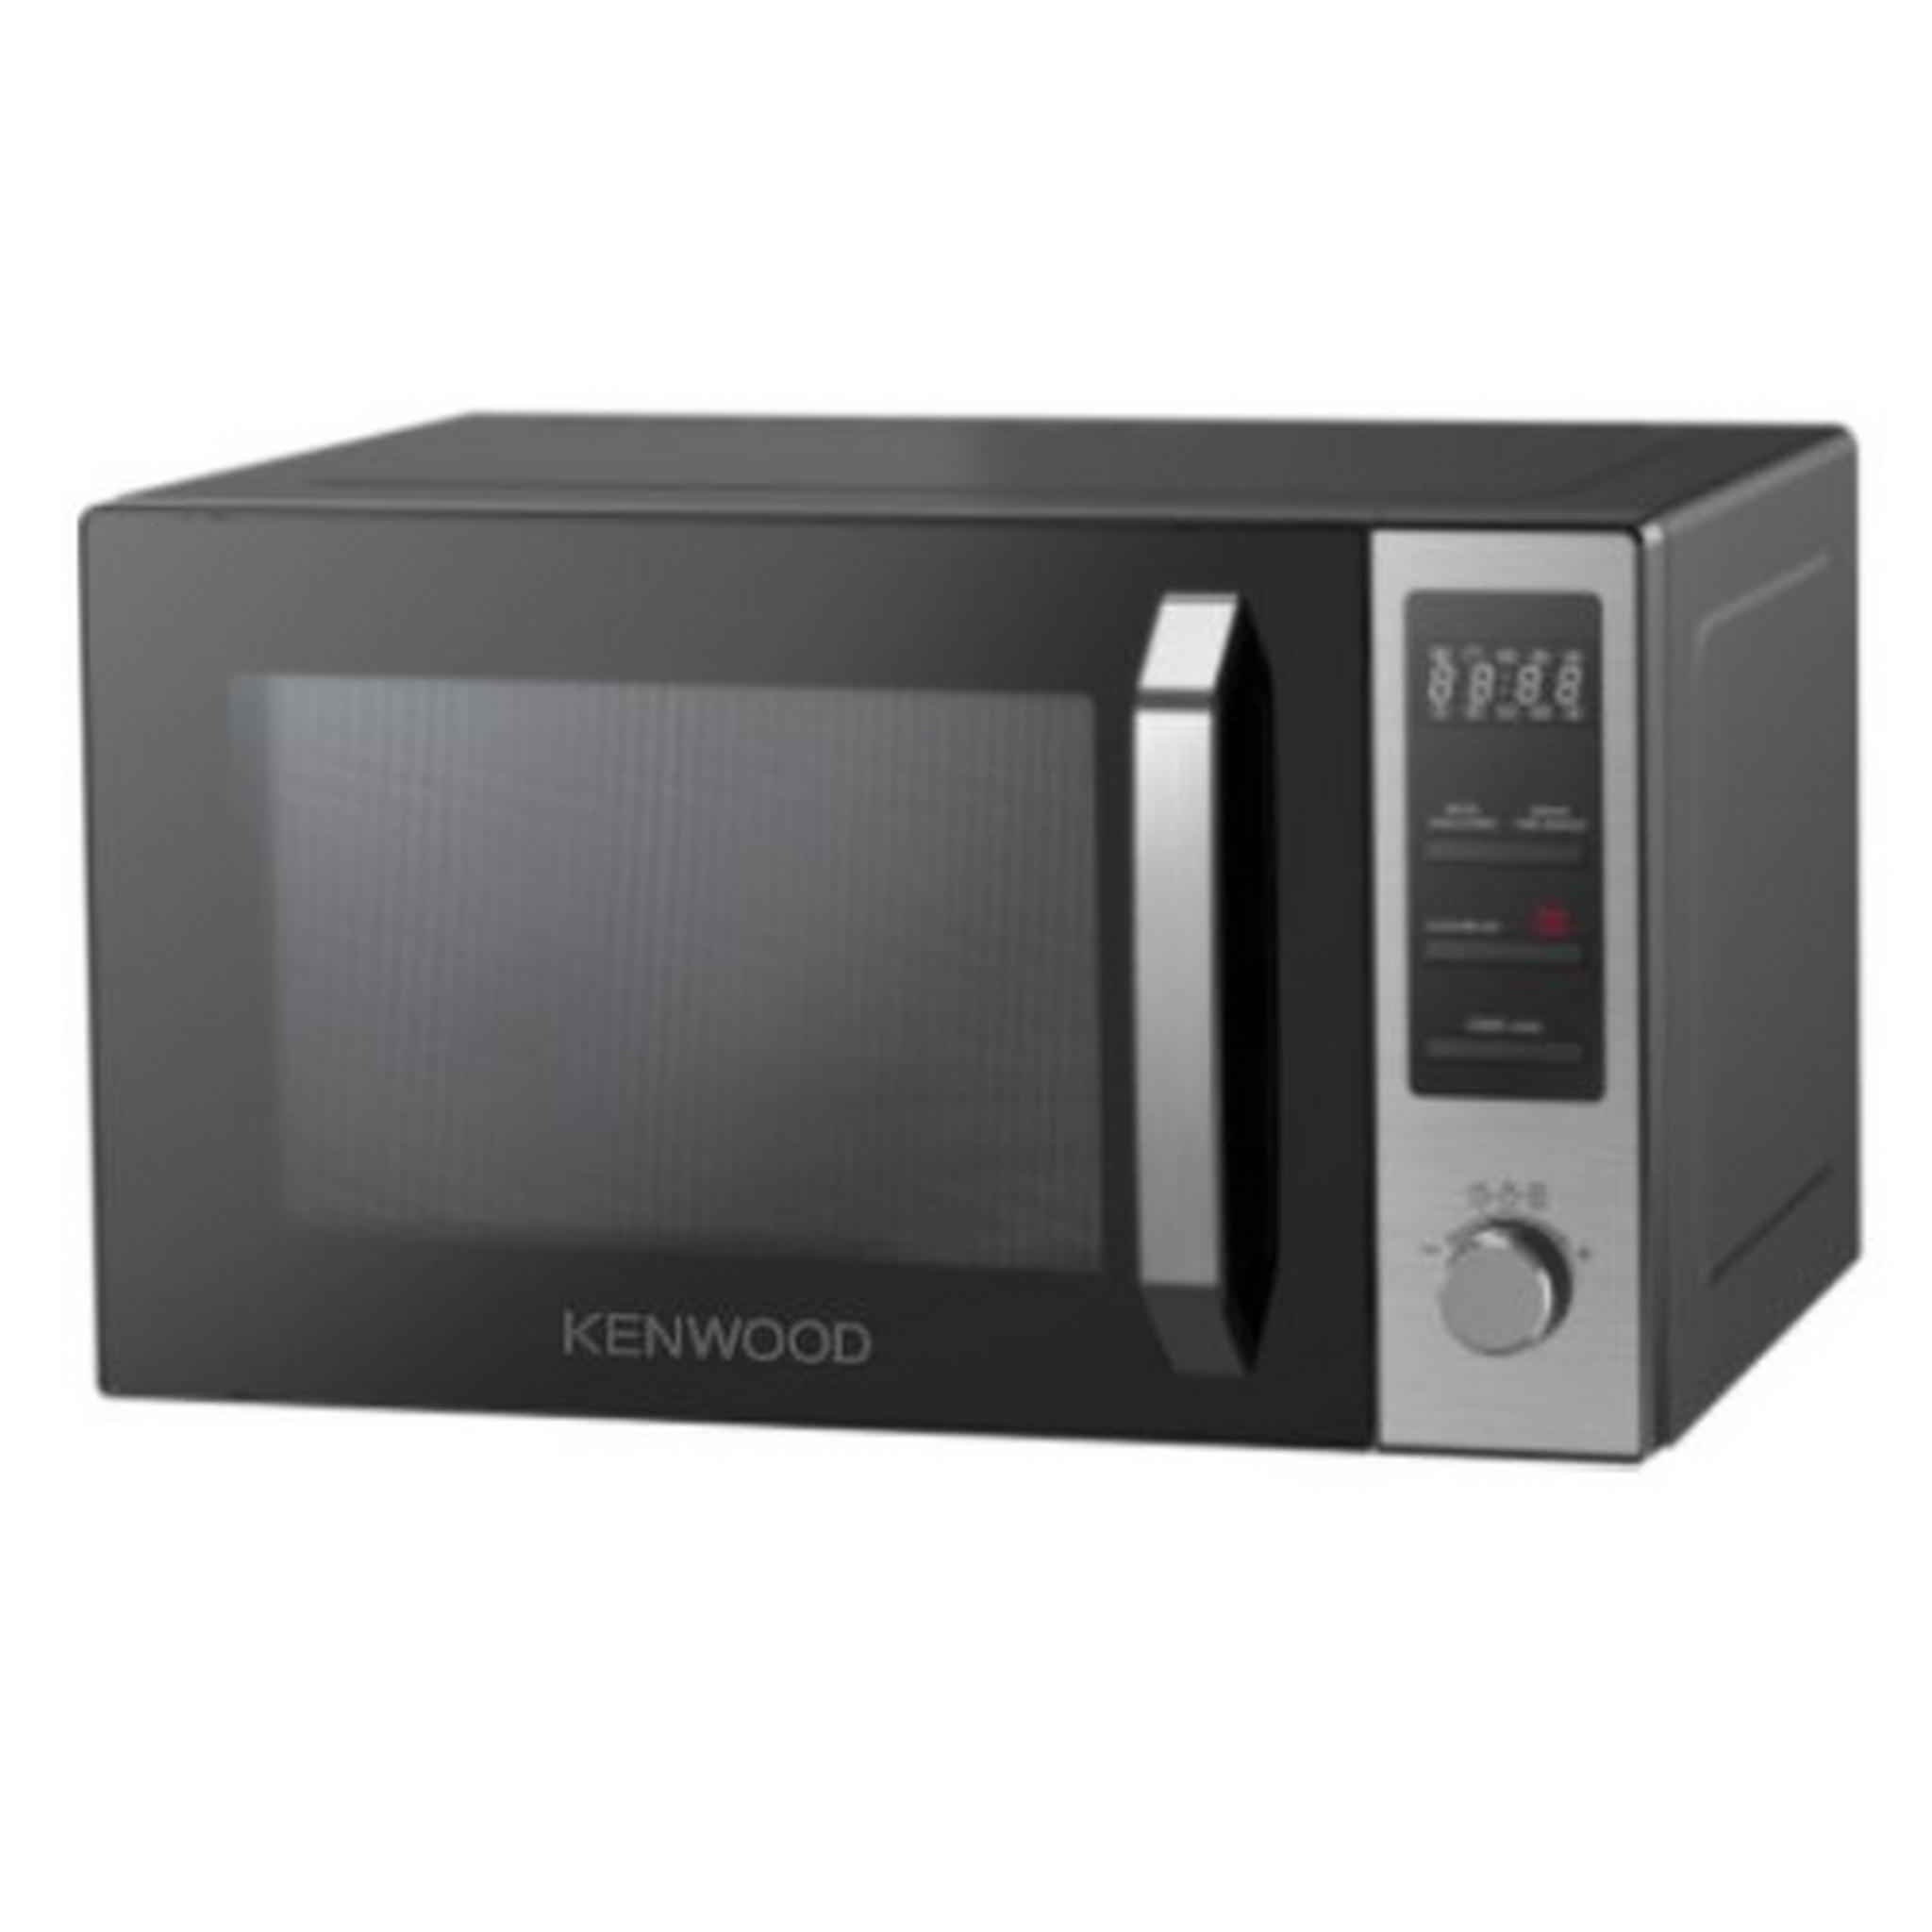 Kenwood 800W 30L Grill/Convection Microwave - MWM31